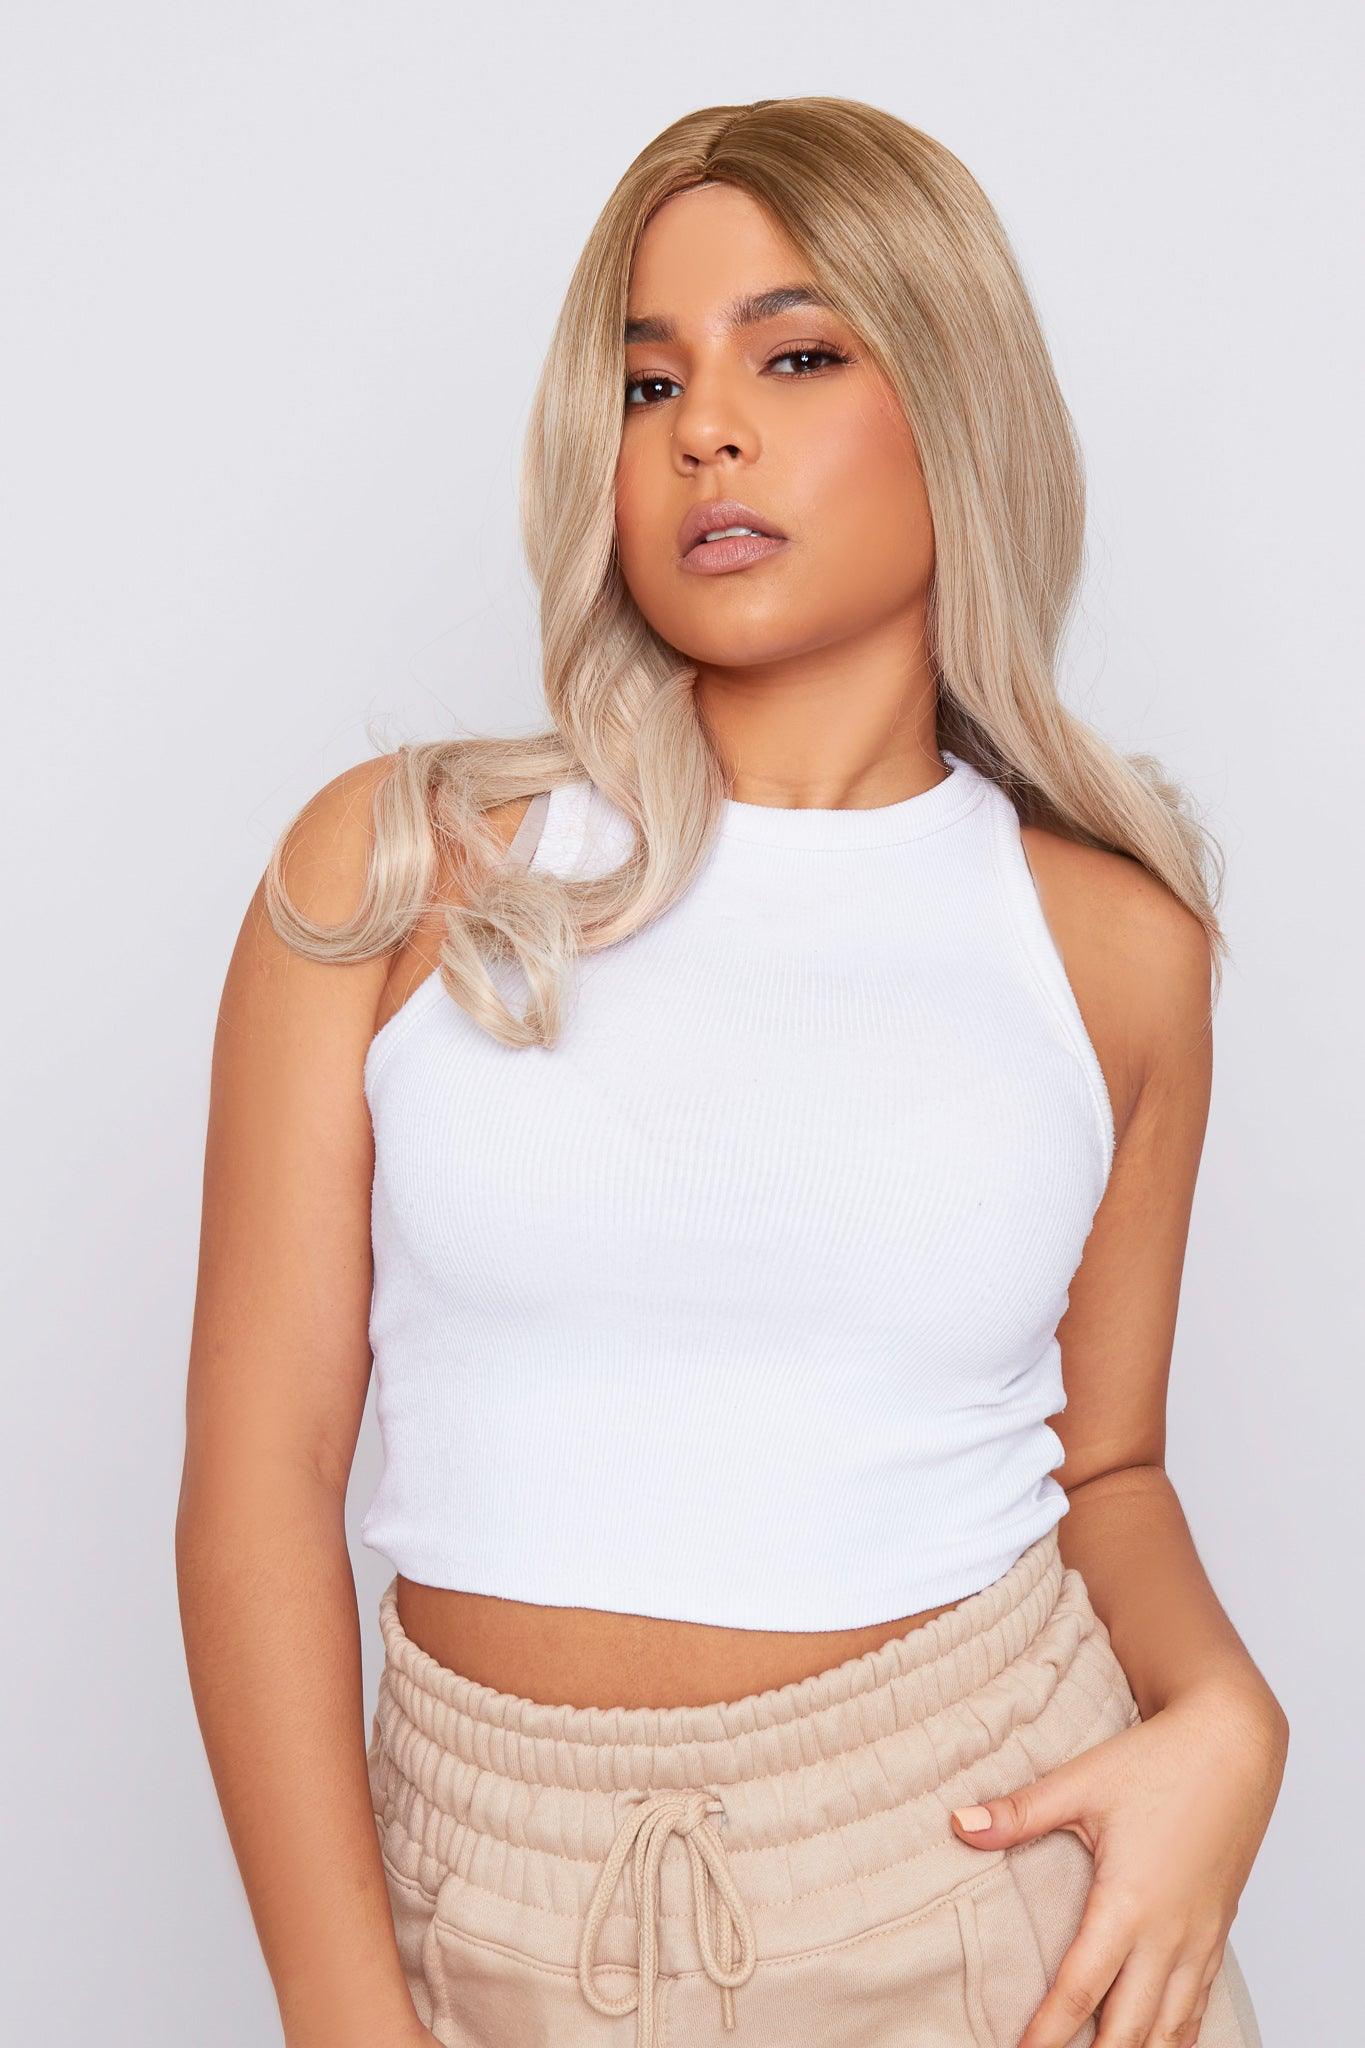 mixed race girl in natural blonde non lace synthetic hair wig wearing white top